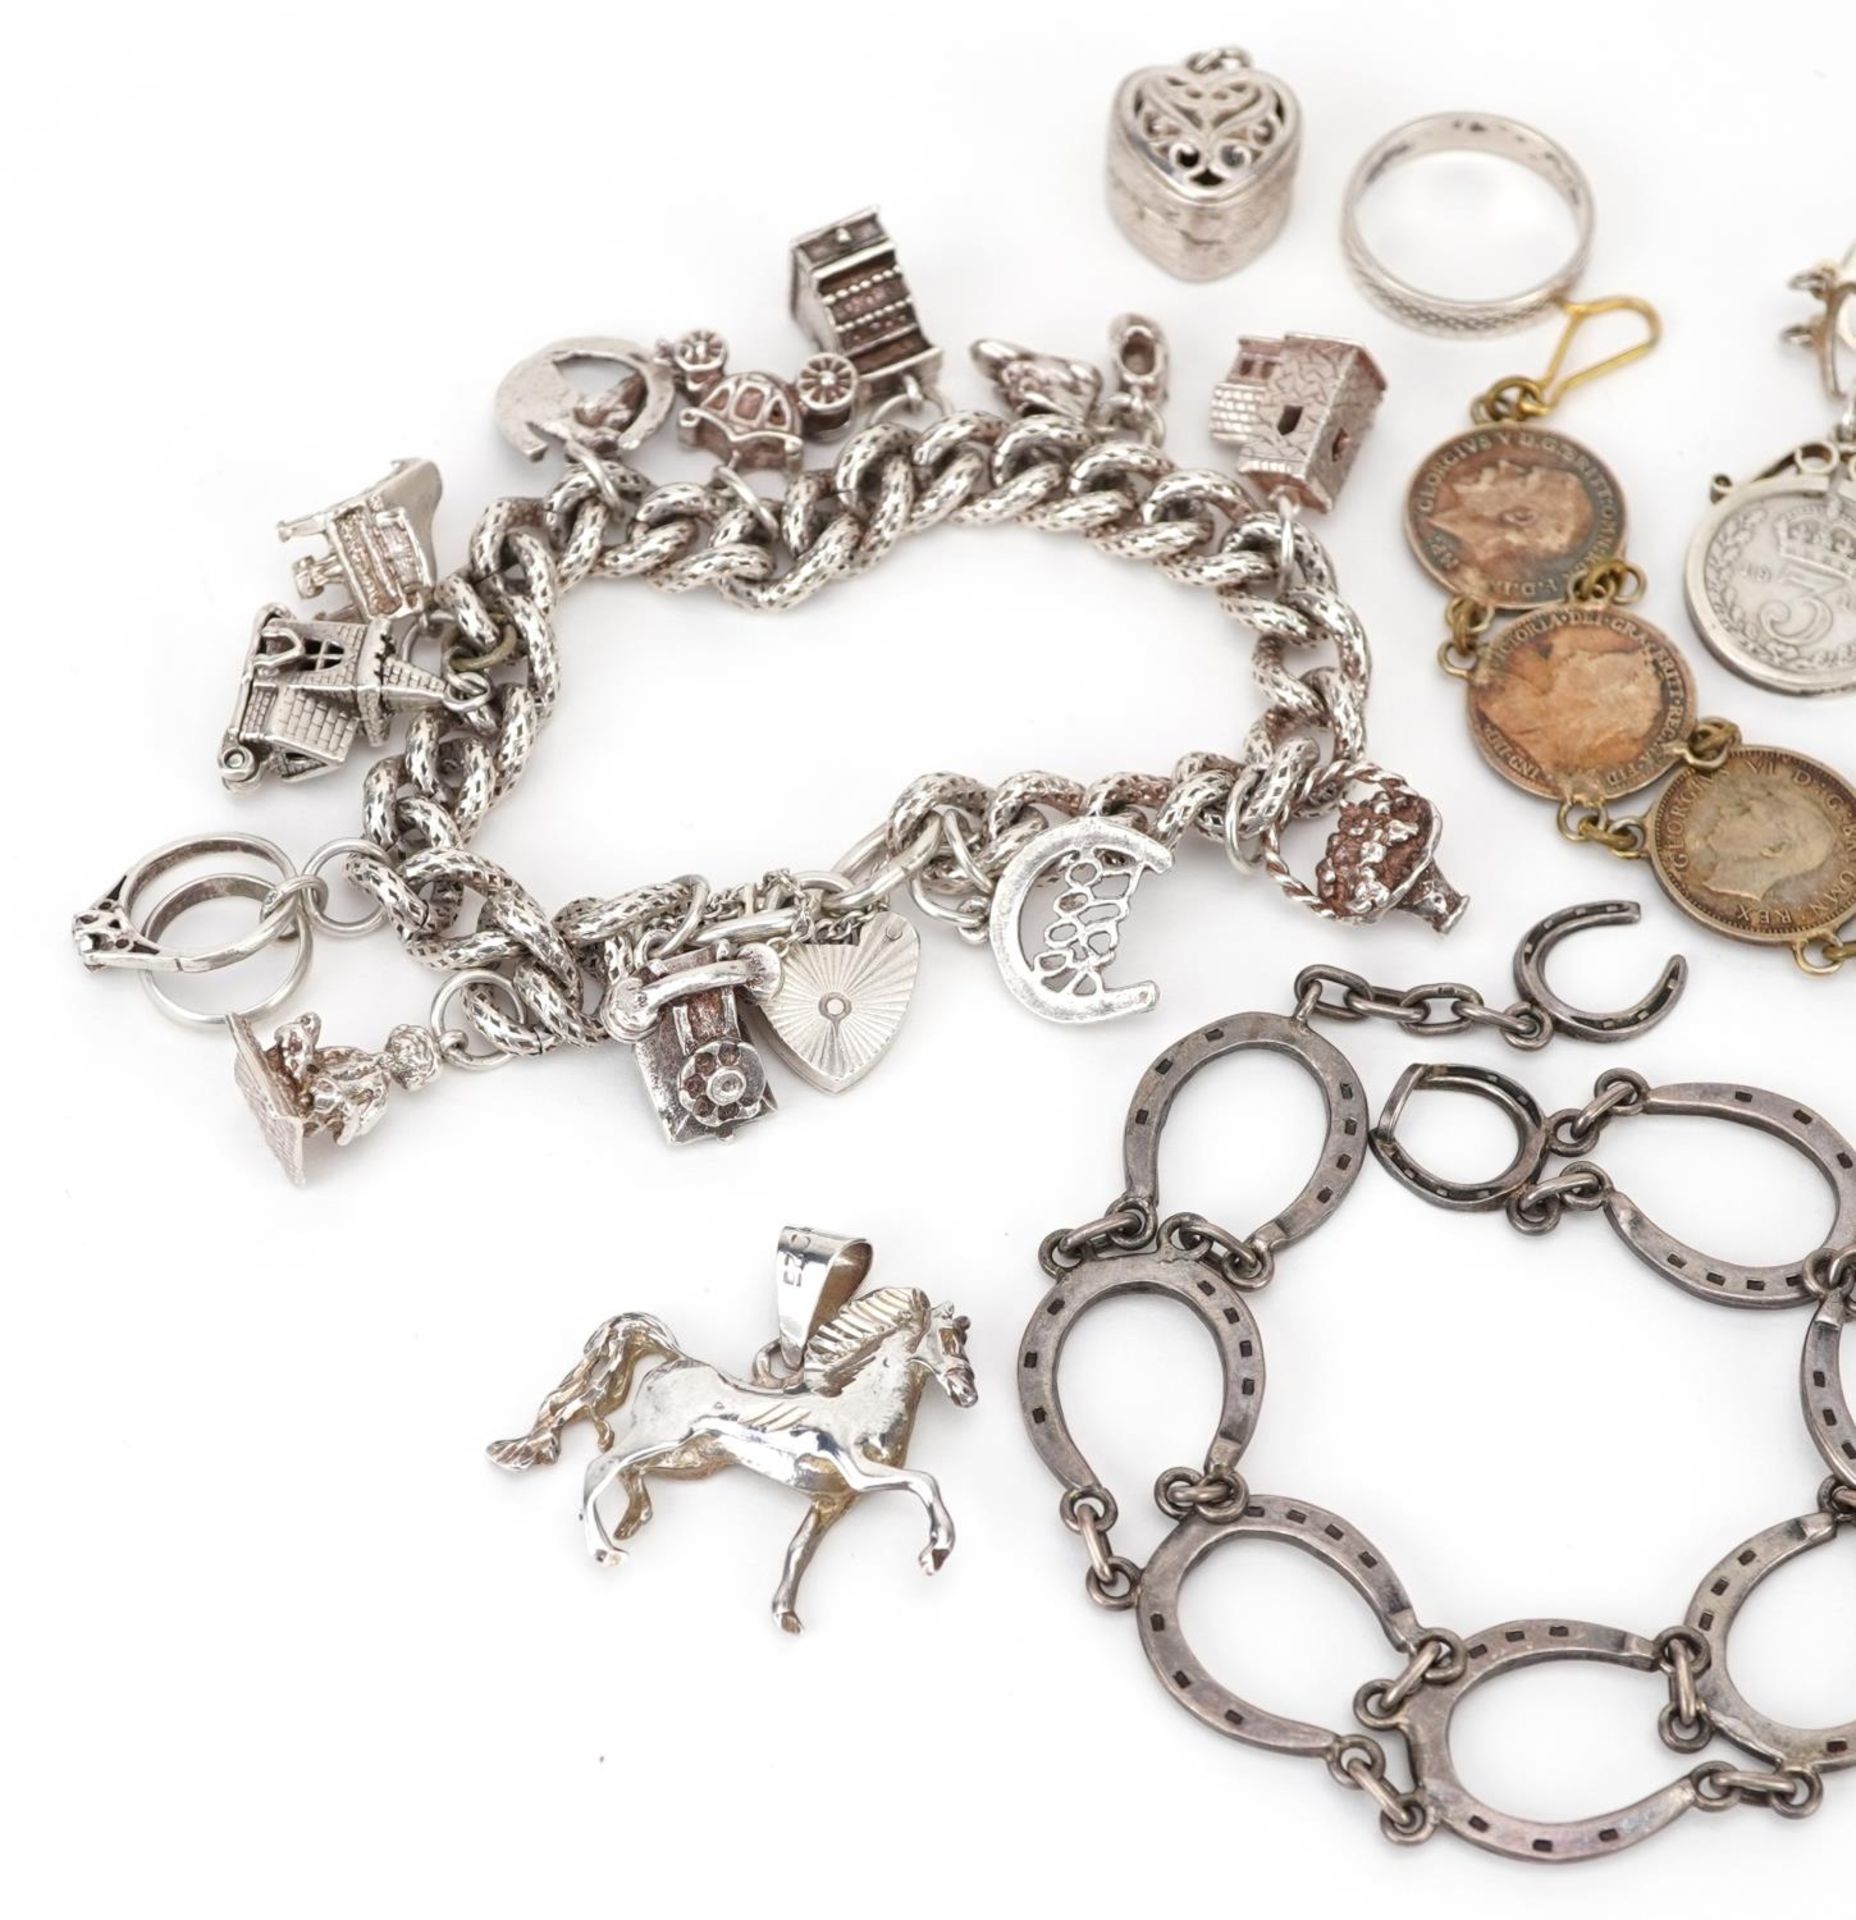 Silver jewellery including a charm bracelet with a collection of silver charms, lucky horseshoe - Image 2 of 5